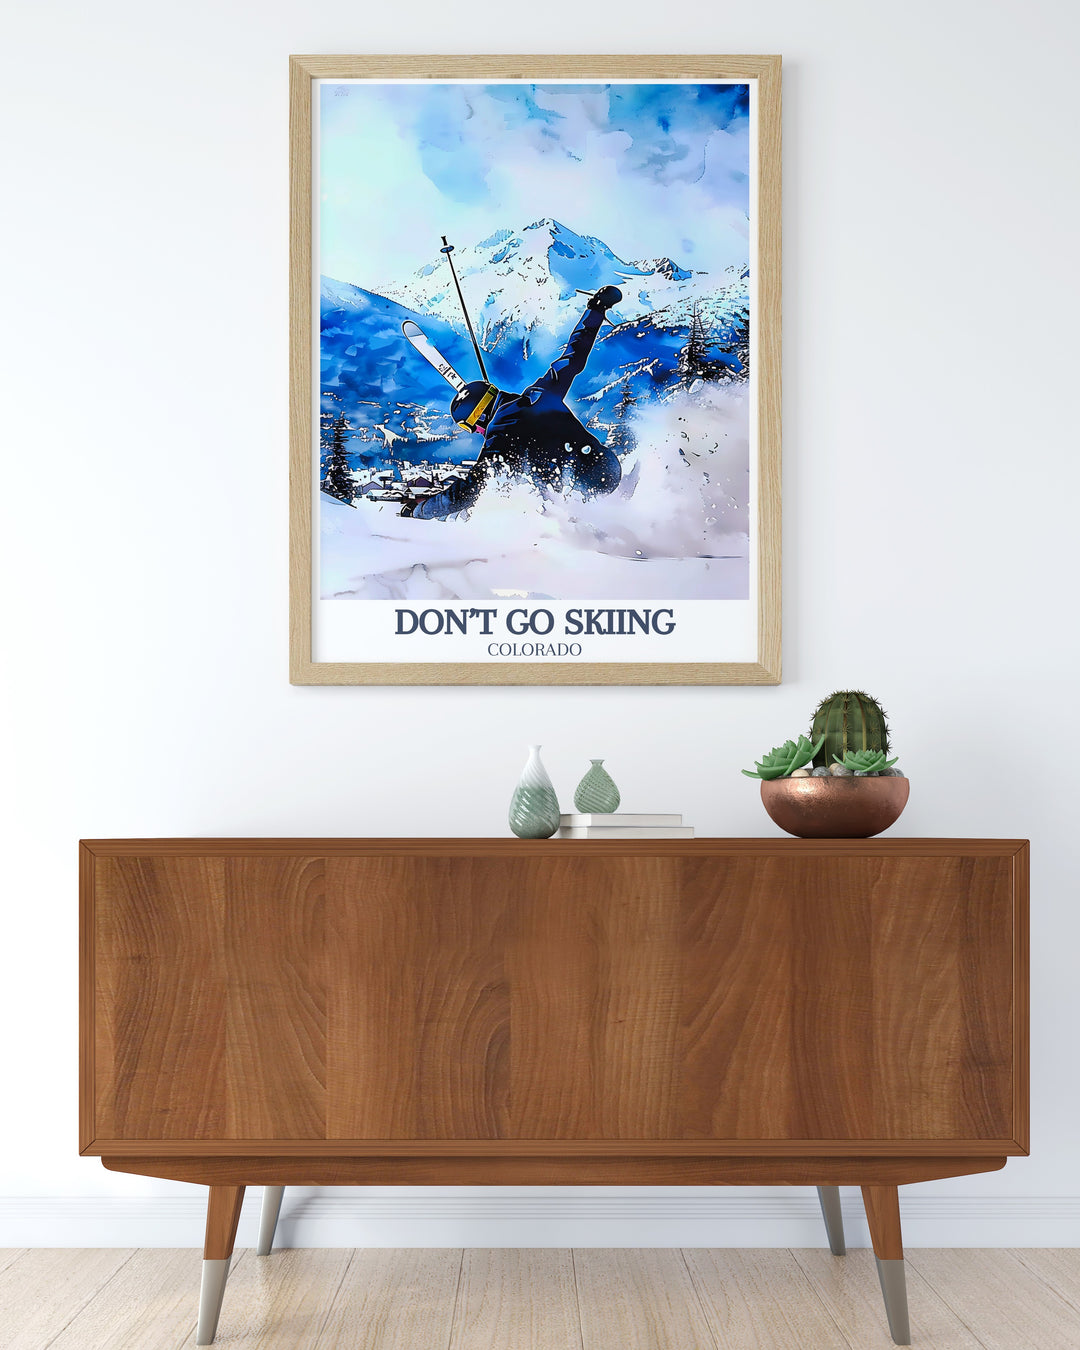 Vintage ski poster of Aspen, Colorado, USA showcasing the allure of the famous ski resort. This skiing wall art is perfect for adding a touch of adventure to your home. Great for ski enthusiasts and anyone who appreciates retro design and winter sports.